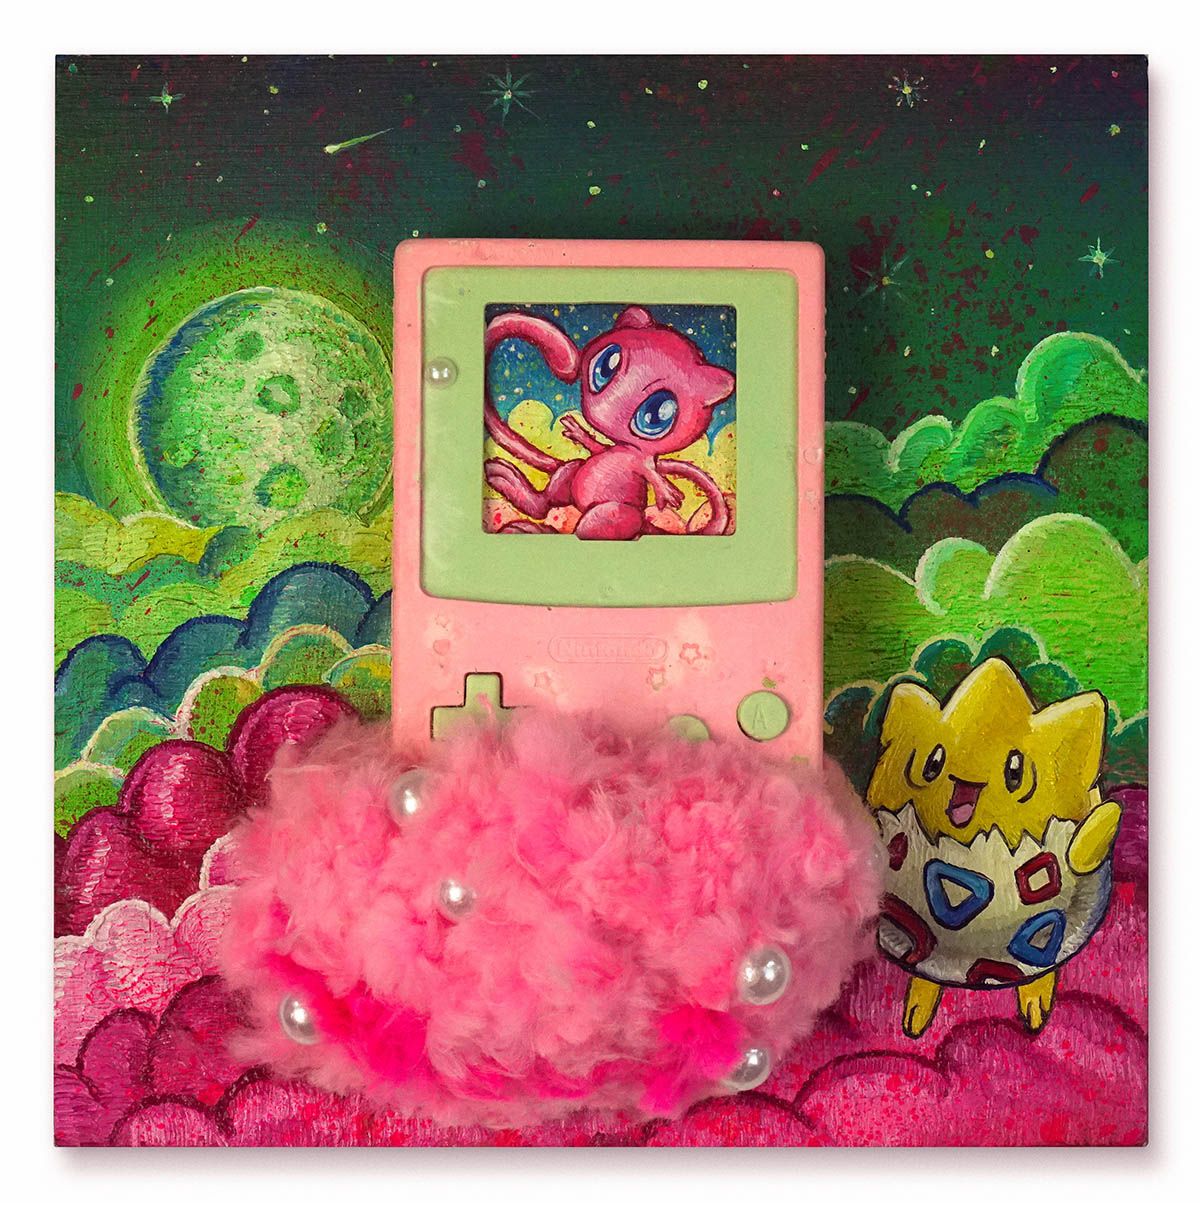 Mew, Togepi and the happy cloud Miguel Scheroff ft. Ira Torres 20 x 20 x 7 cm Oil, acrylic resin, fabric, fake pearls, methacrylate, wood, porex.